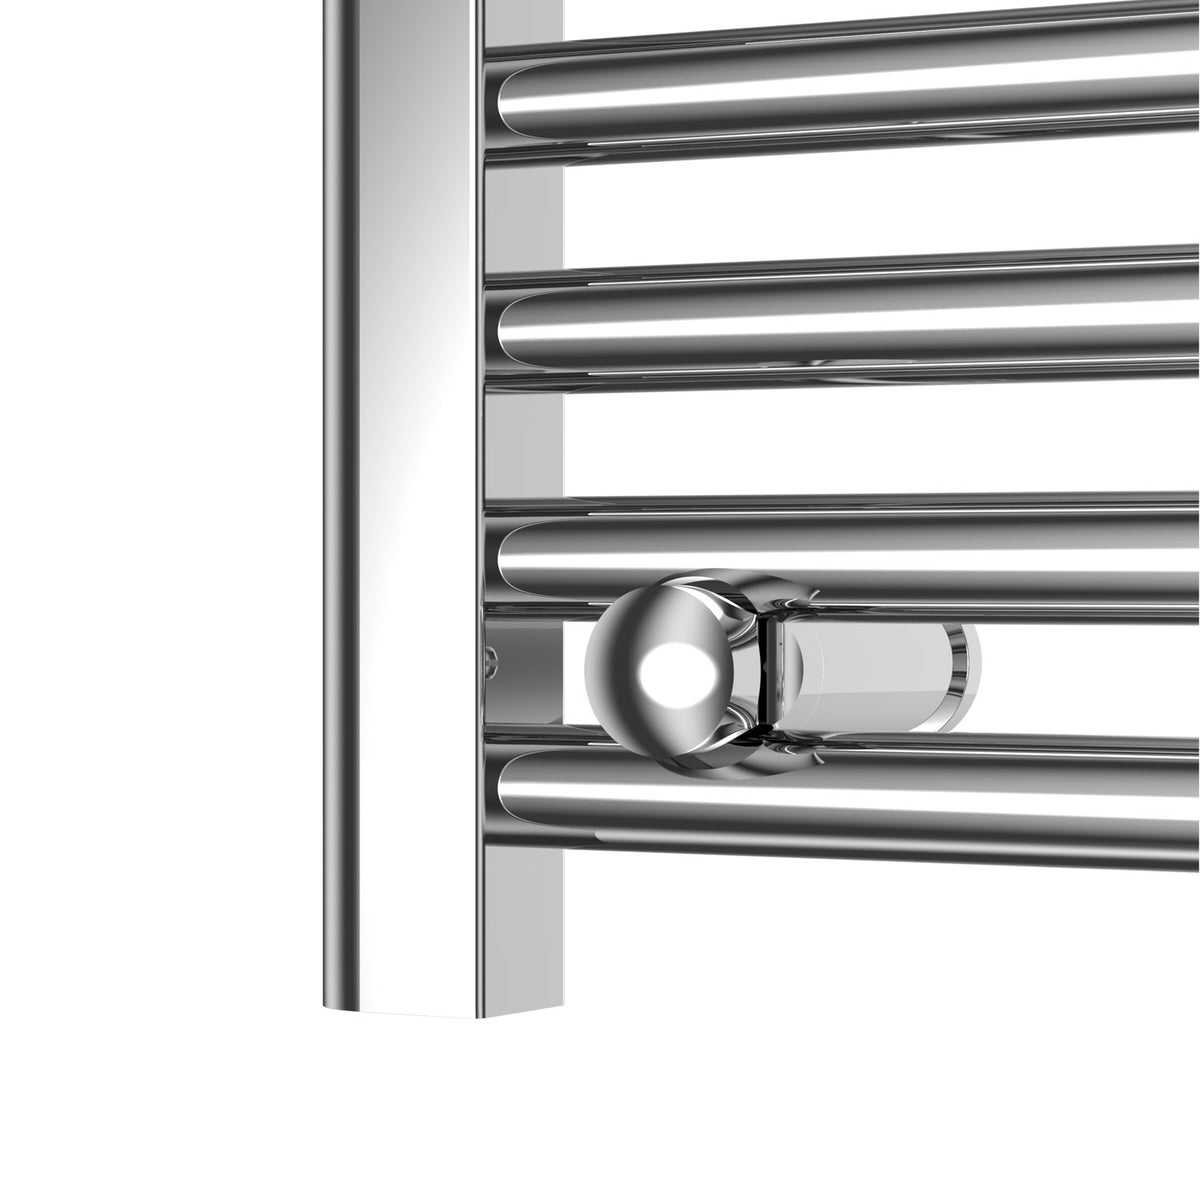 1200 mm High 400 mm Wide Chrome Towel Rail Central Heating